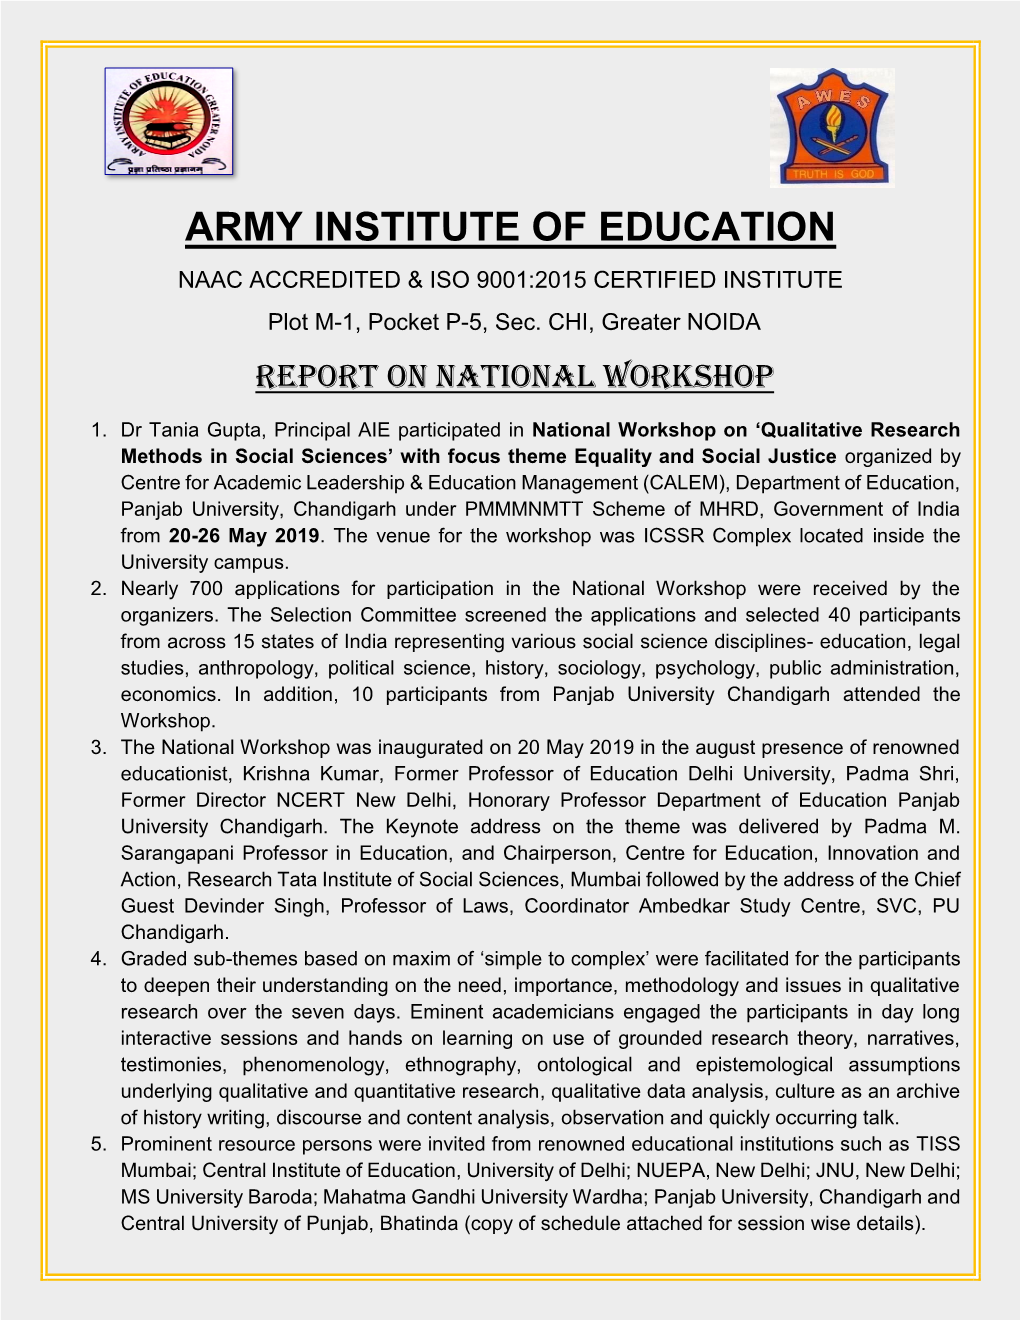 ARMY INSTITUTE of EDUCATION NAAC ACCREDITED & ISO 9001:2015 CERTIFIED INSTITUTE Plot M-1, Pocket P-5, Sec